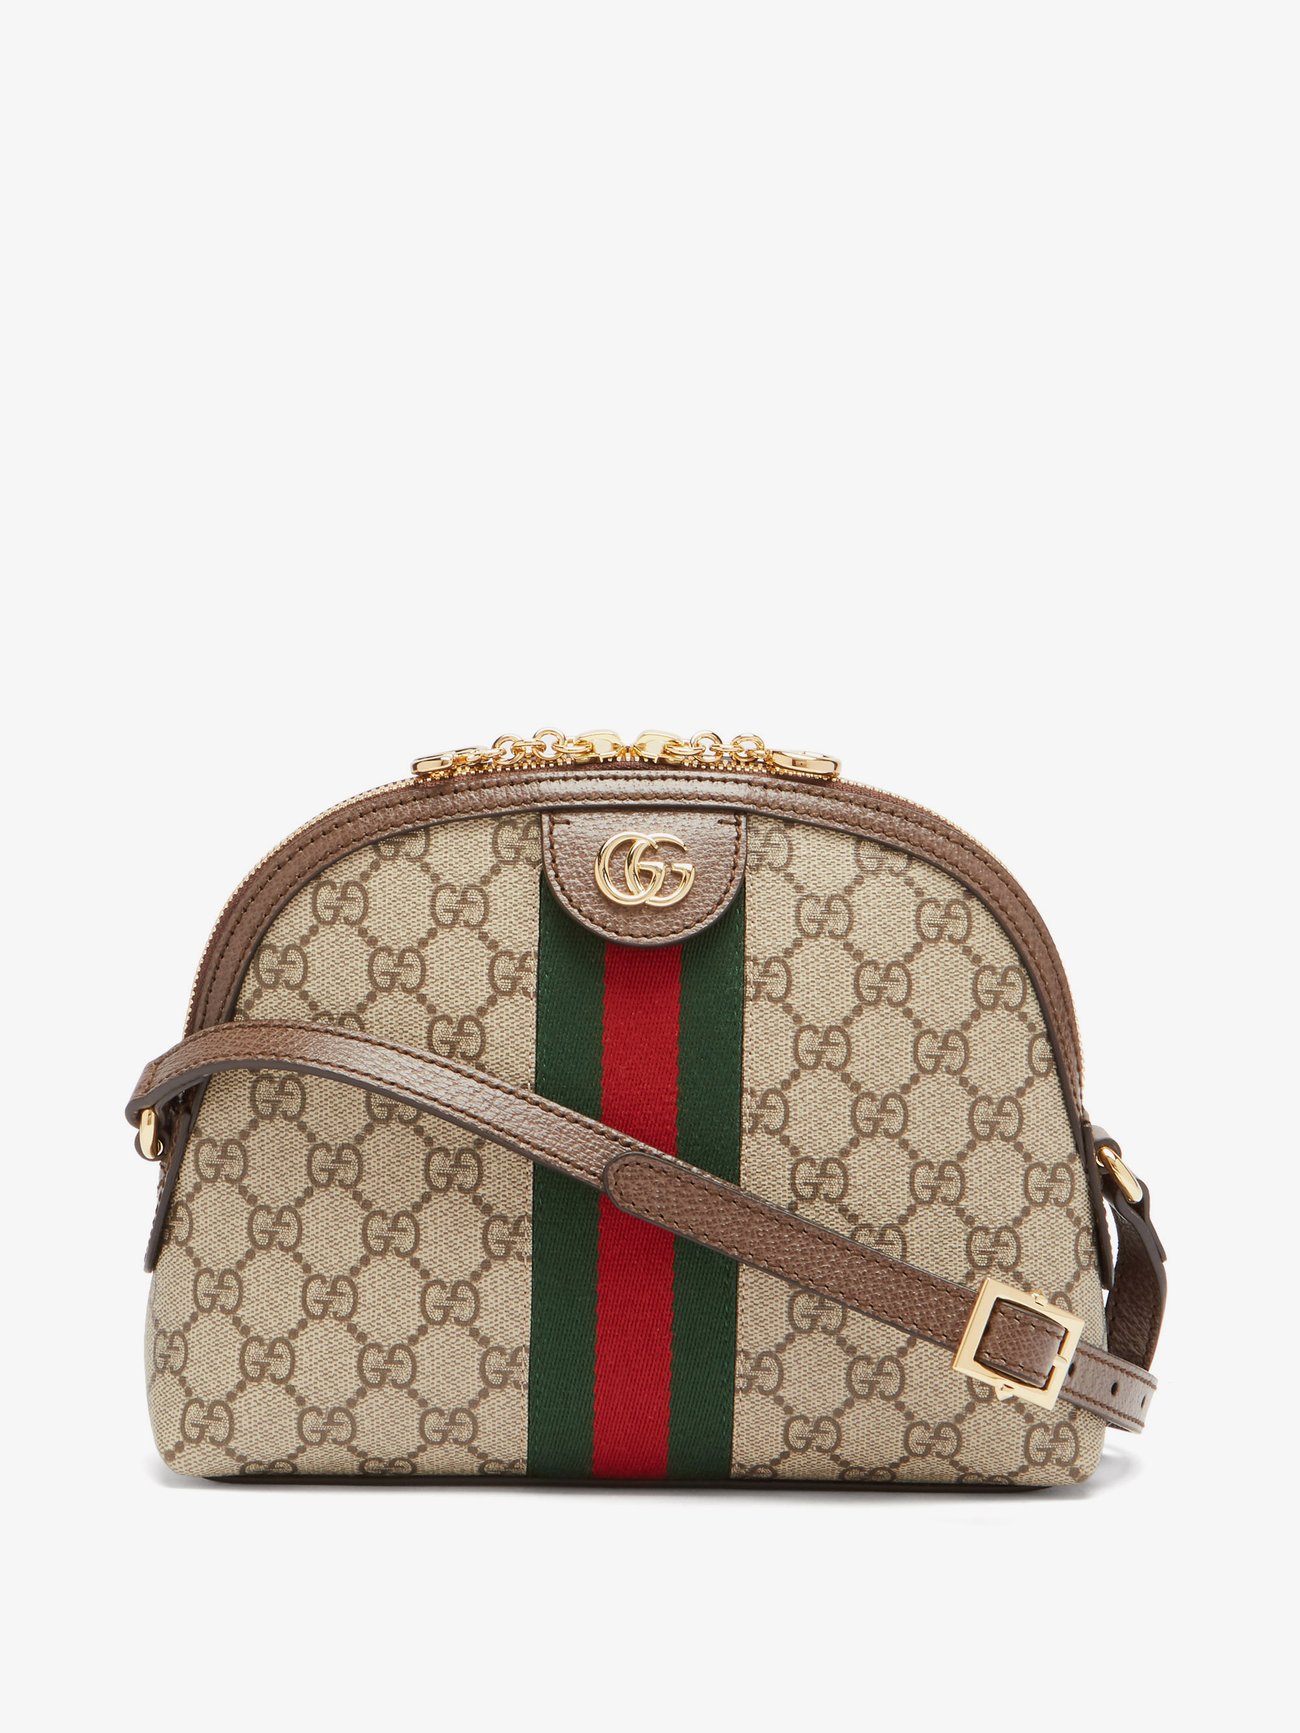 Gucci - Ophidia GG Supreme Shoulder Bag - Women - Canvas/Leather - One Size - Neutrals